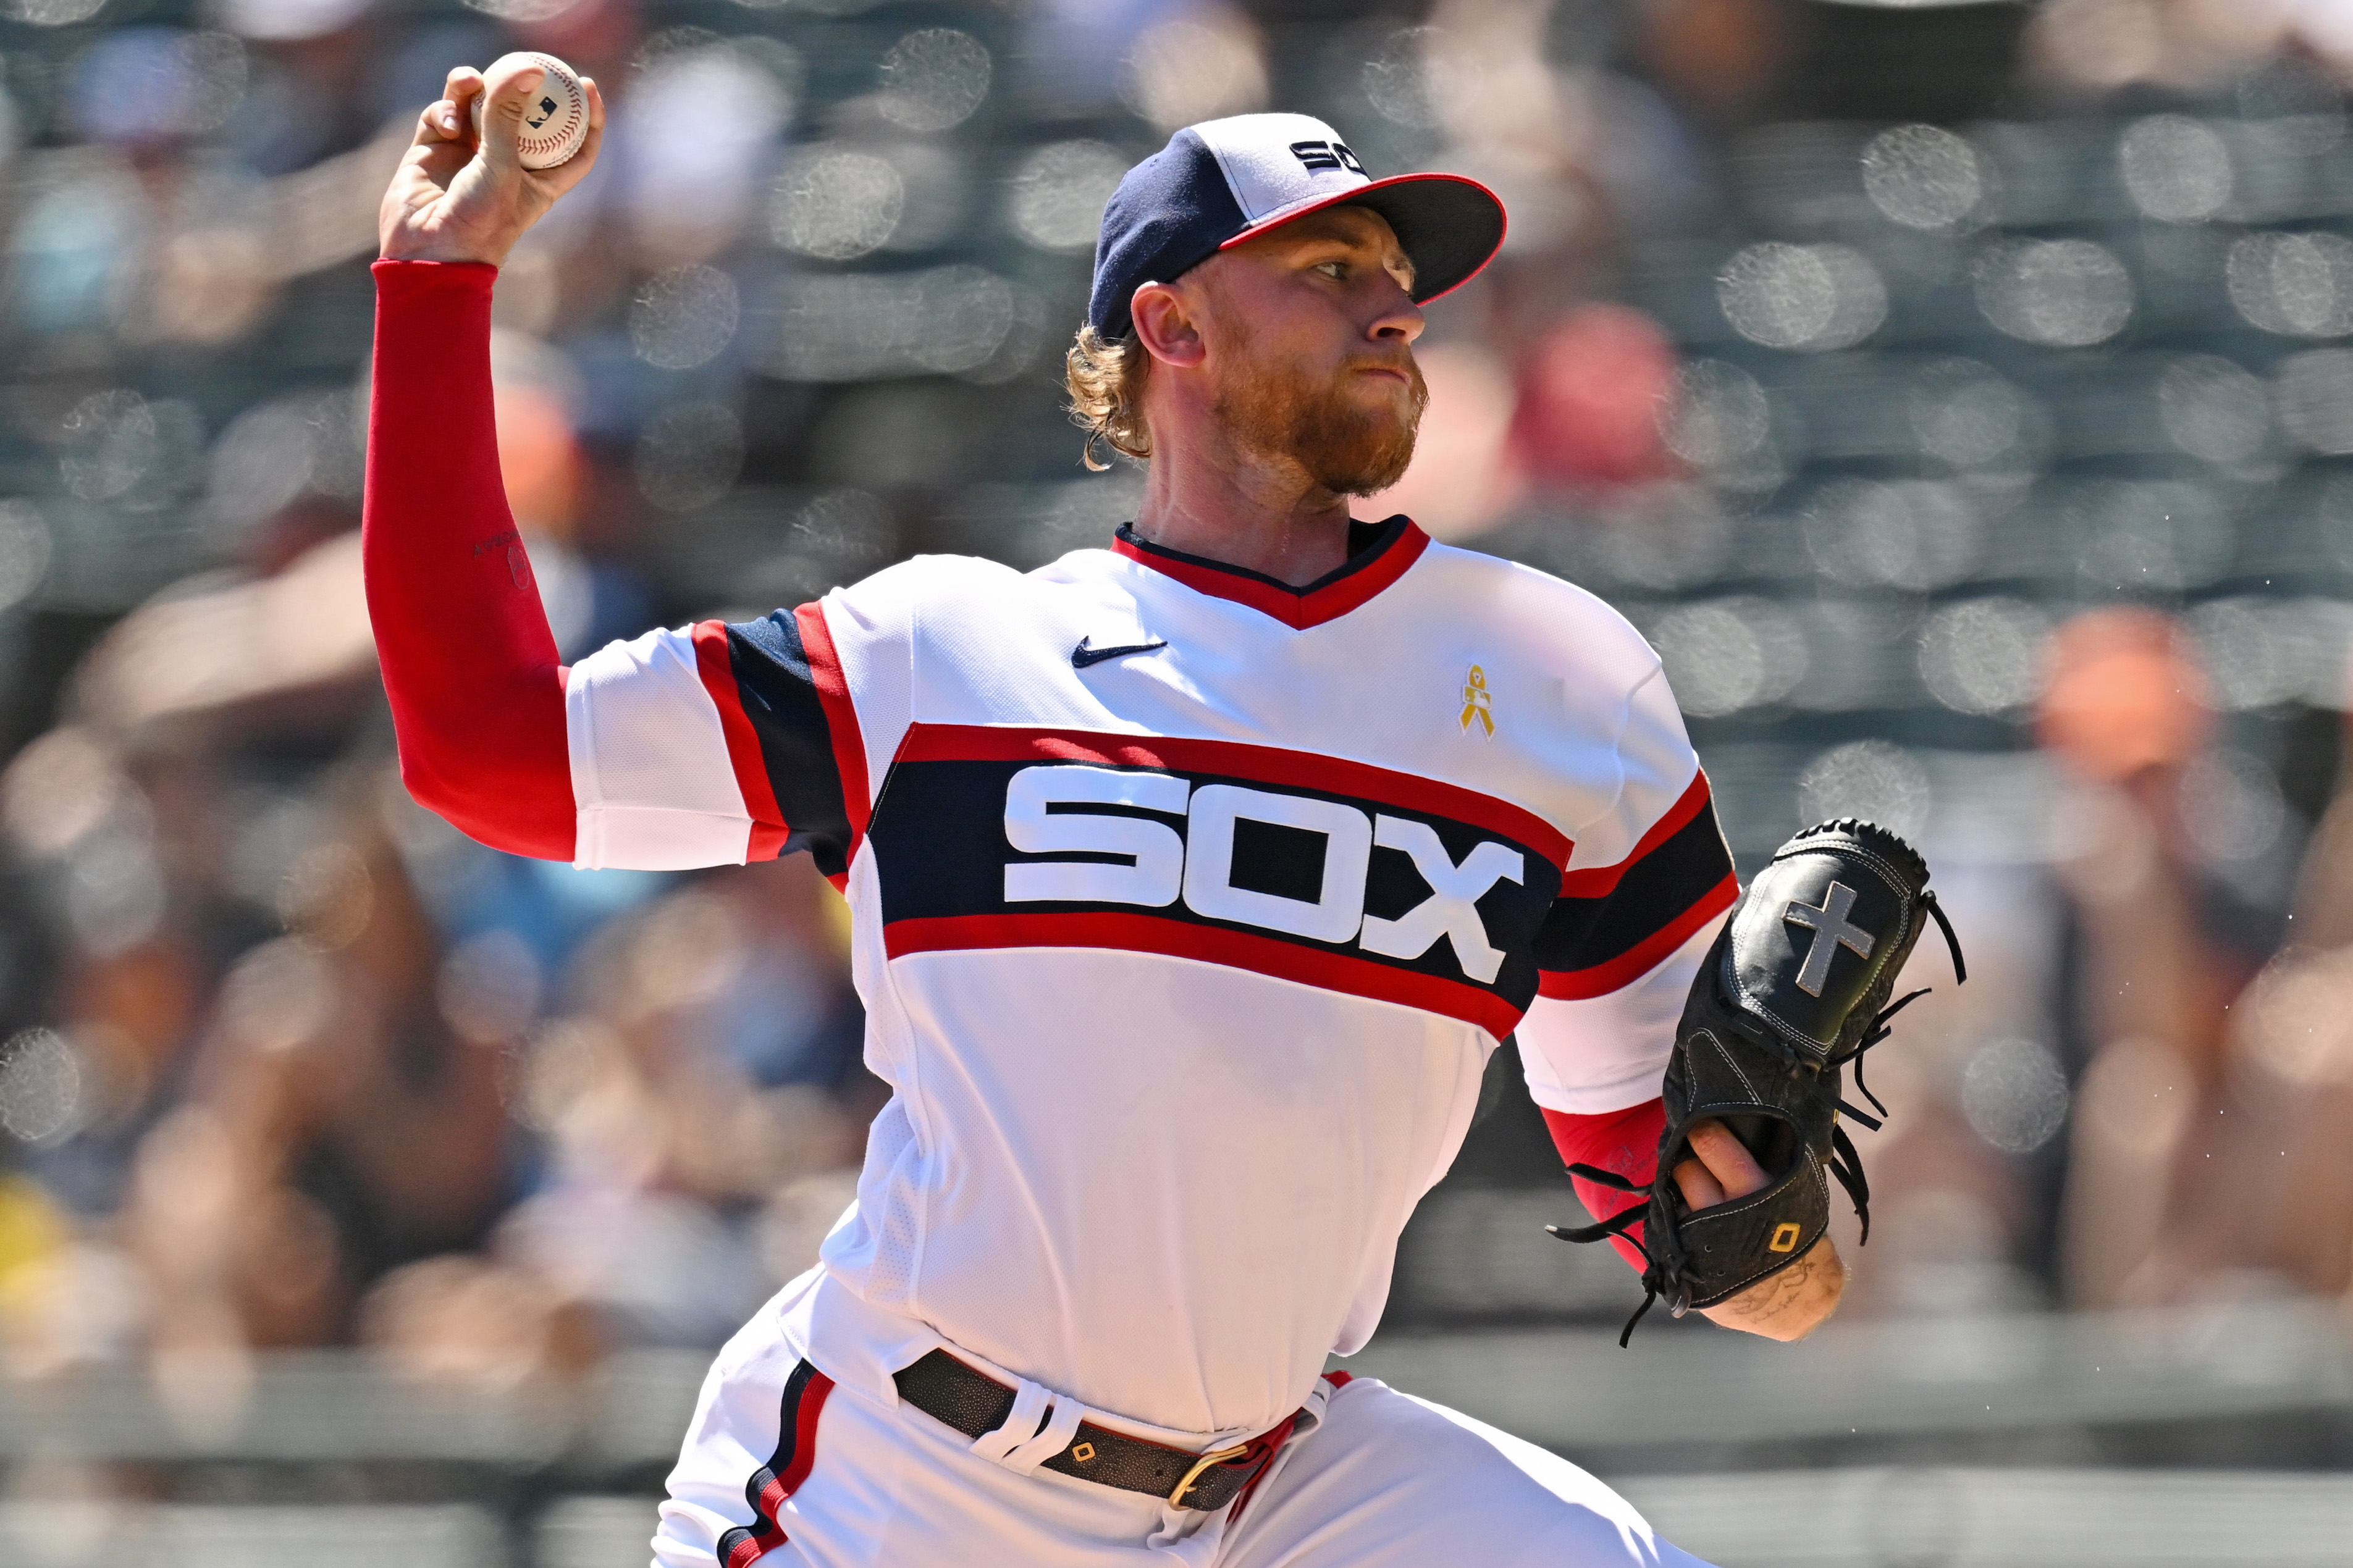 Michael Kopech dazzles in 2-0 Chicago White Sox victory - South Side Sox